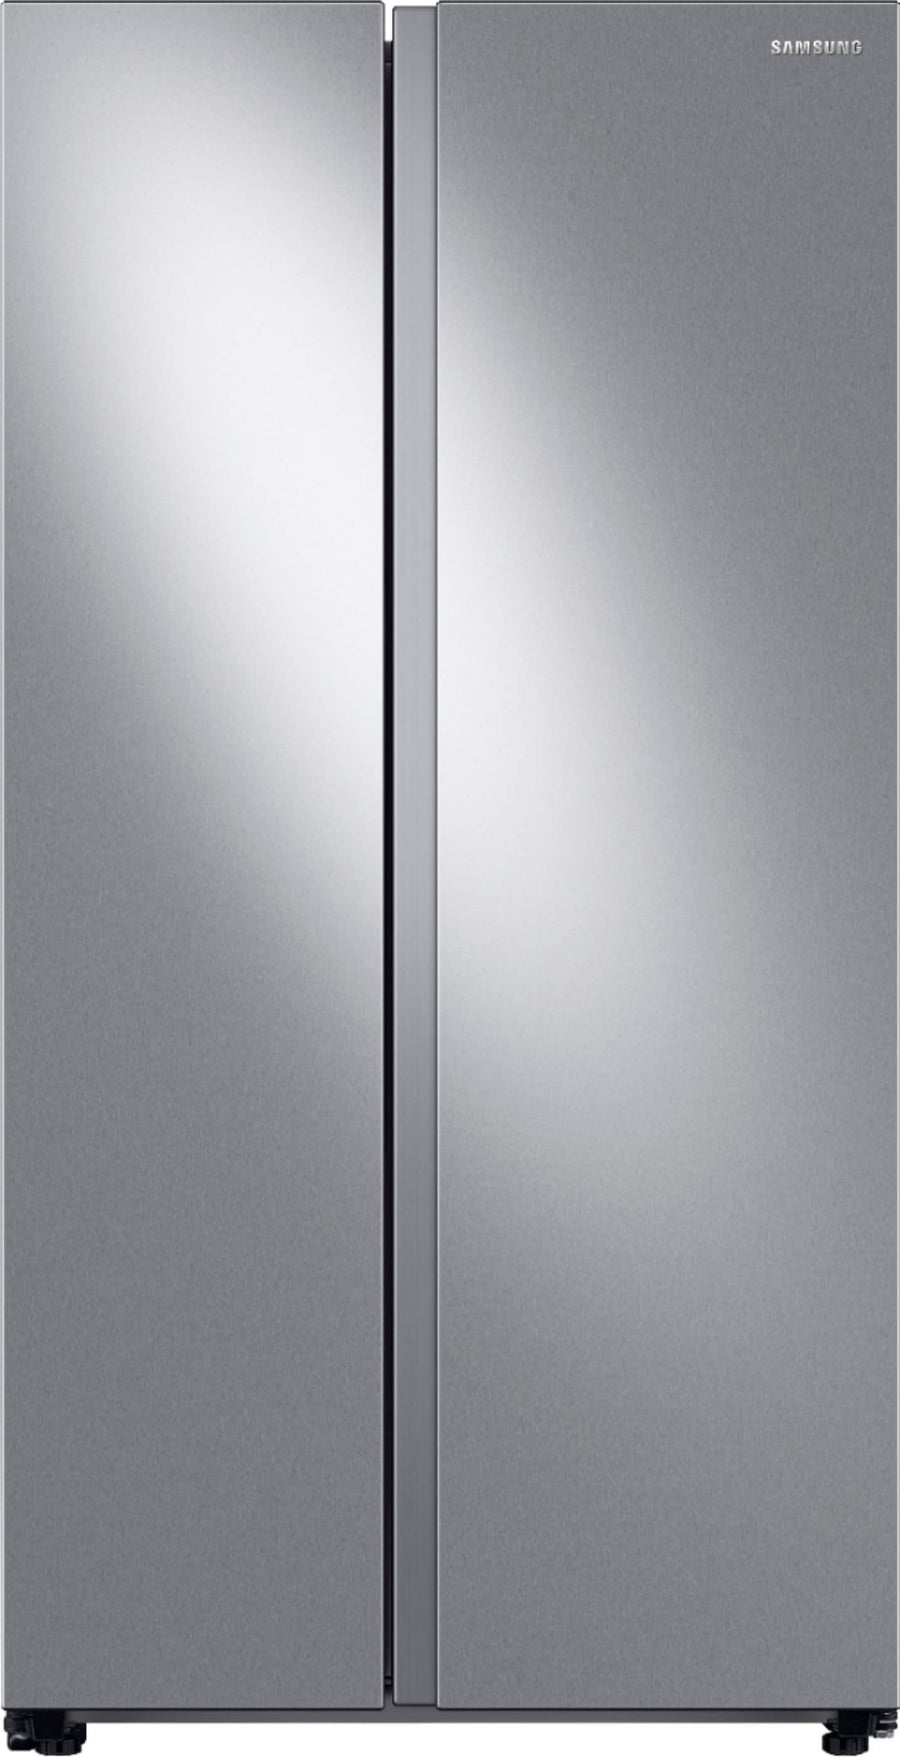 Samsung - 28 cu. ft. Side-by-Side Refrigerator with WiFi and Large Capacity - Stainless steel_0